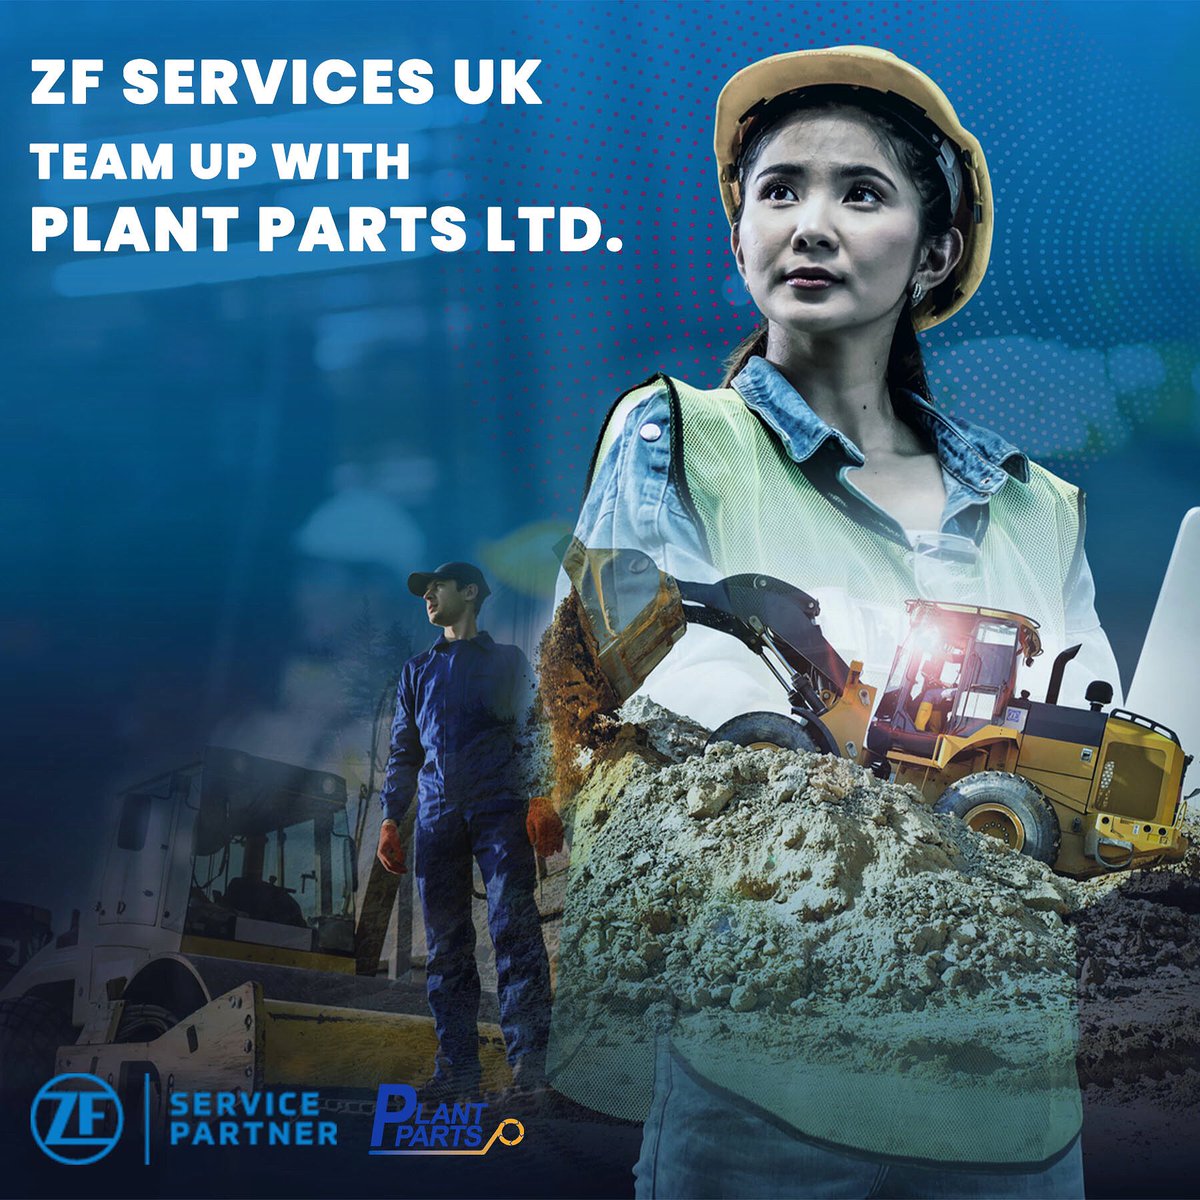 We are very proud to announce that Plant Parts Ltd have become the first, official off-highway service partner for ZF Services UK. Read the full announcement and press release here >>> plantparts.eu/zf-services-uk/